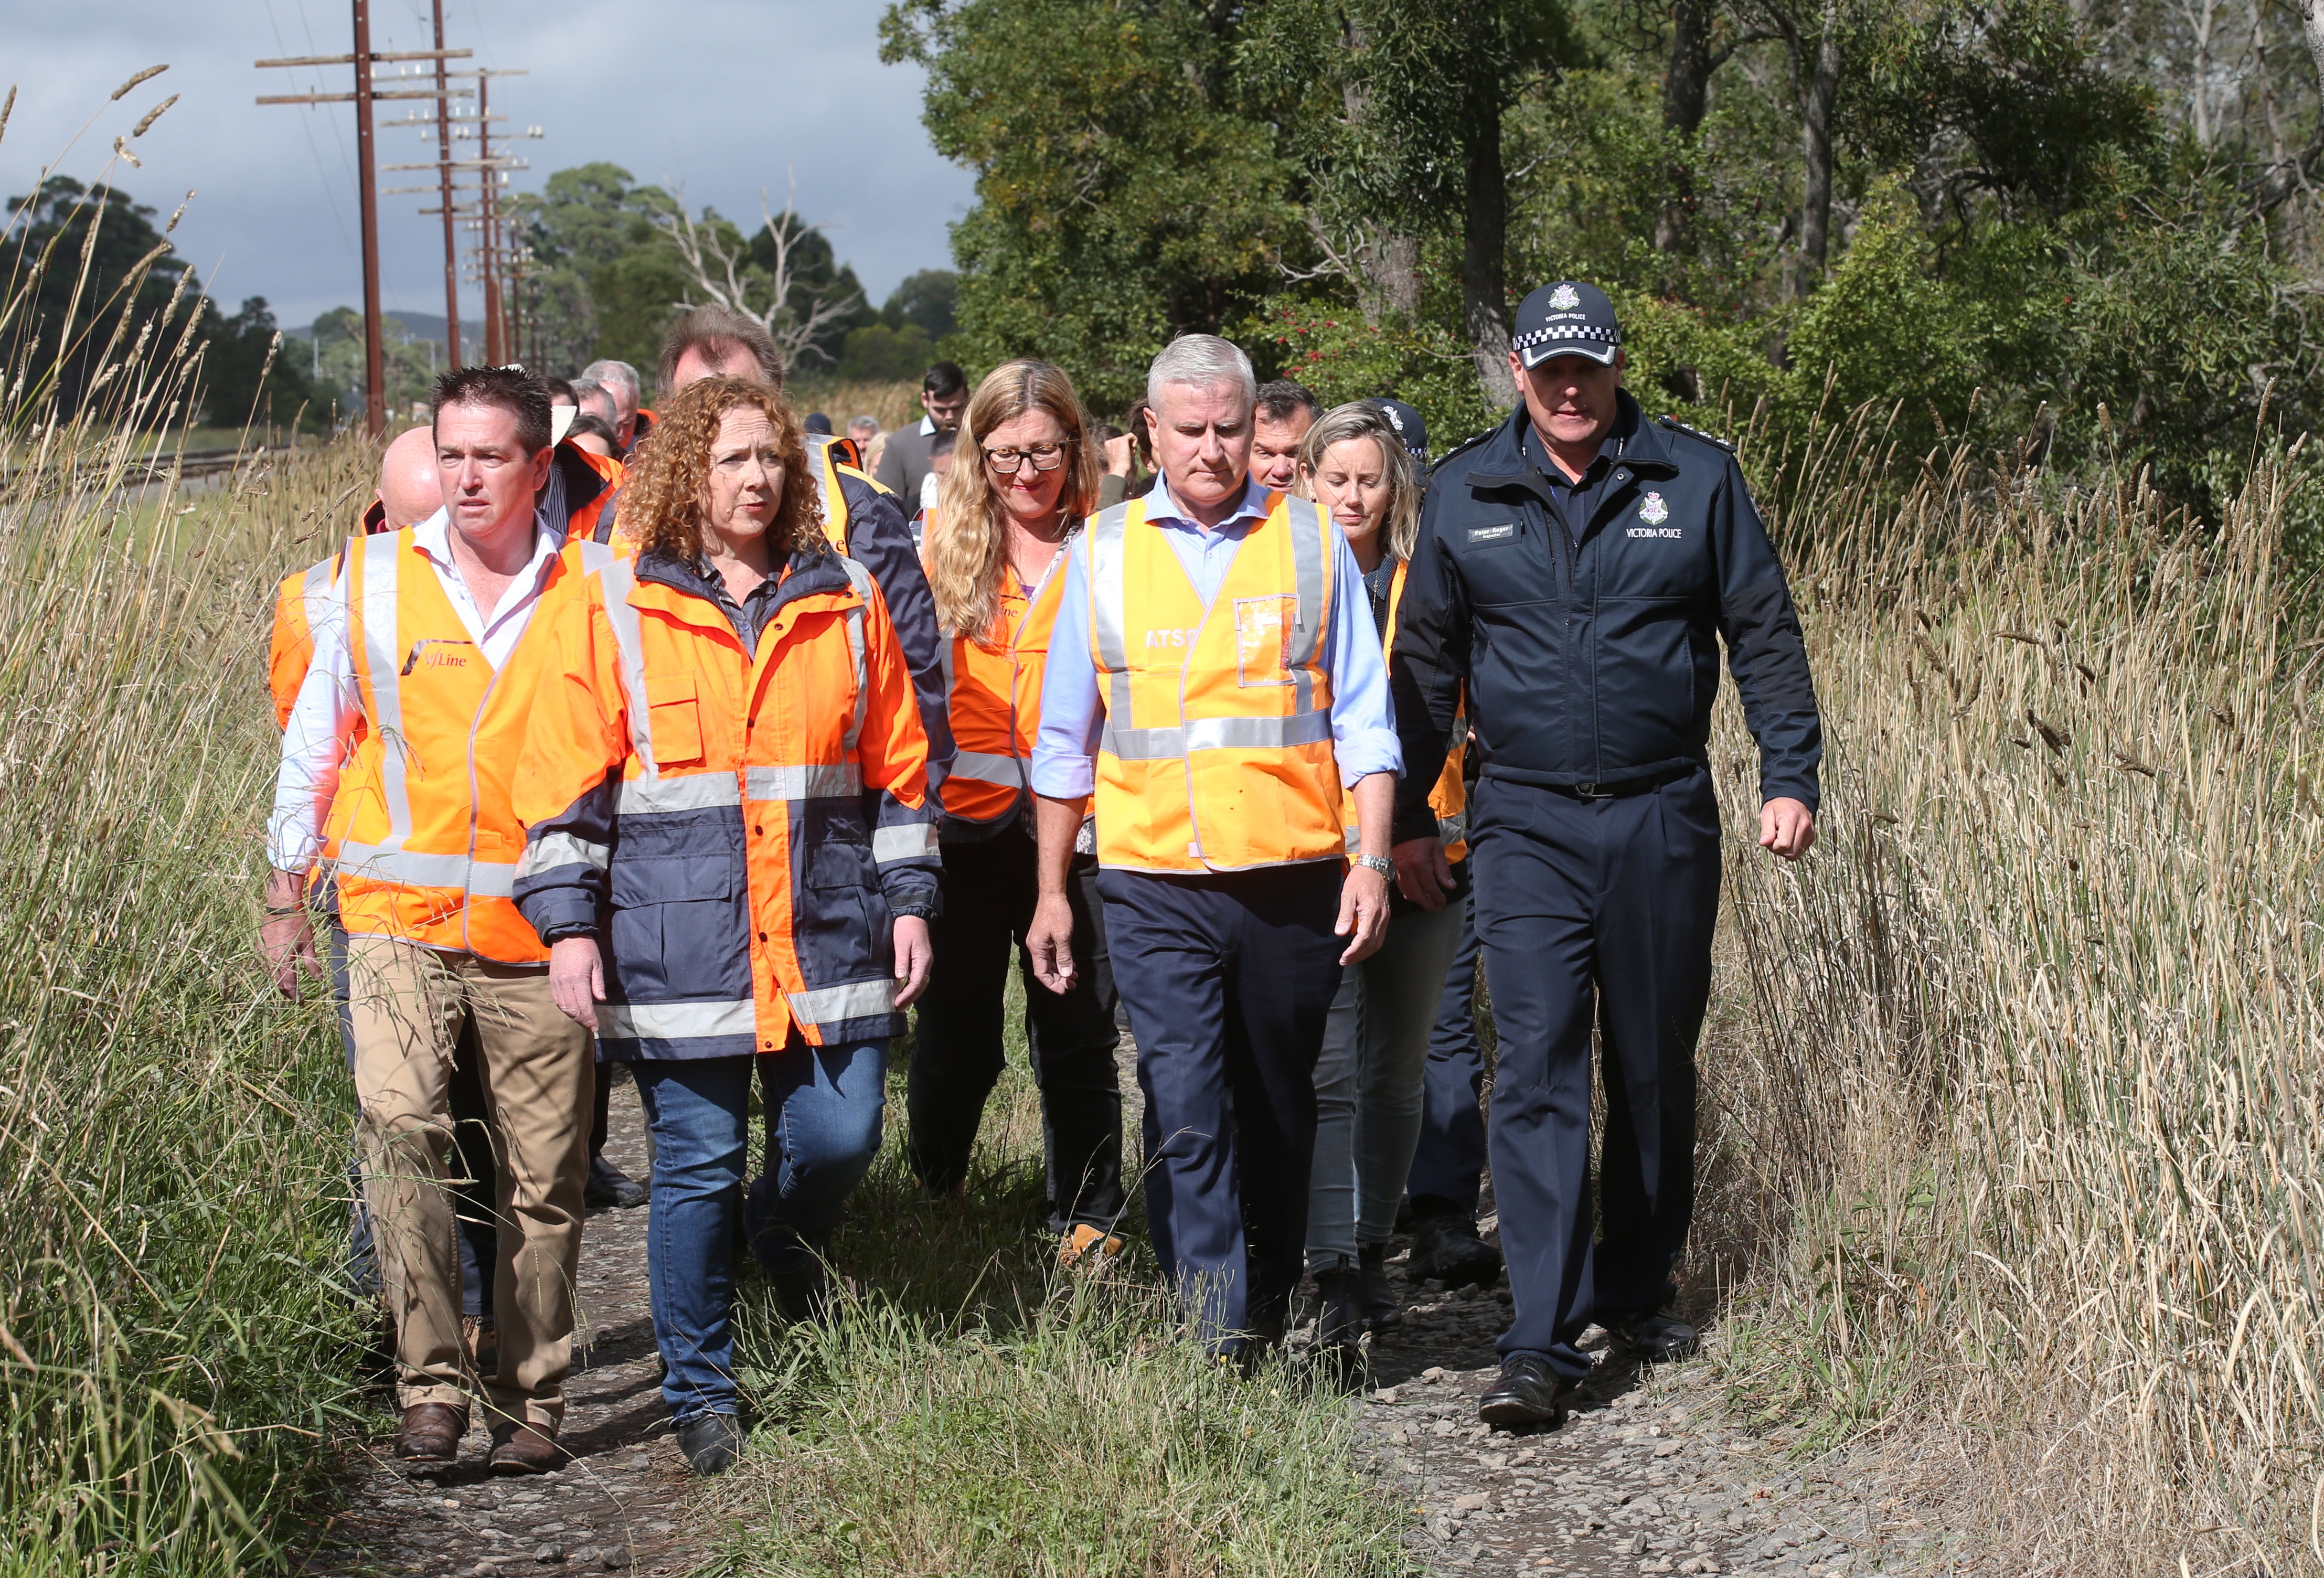 Deputy Prime Minister Michael McCormack visited the crash site on Friday.